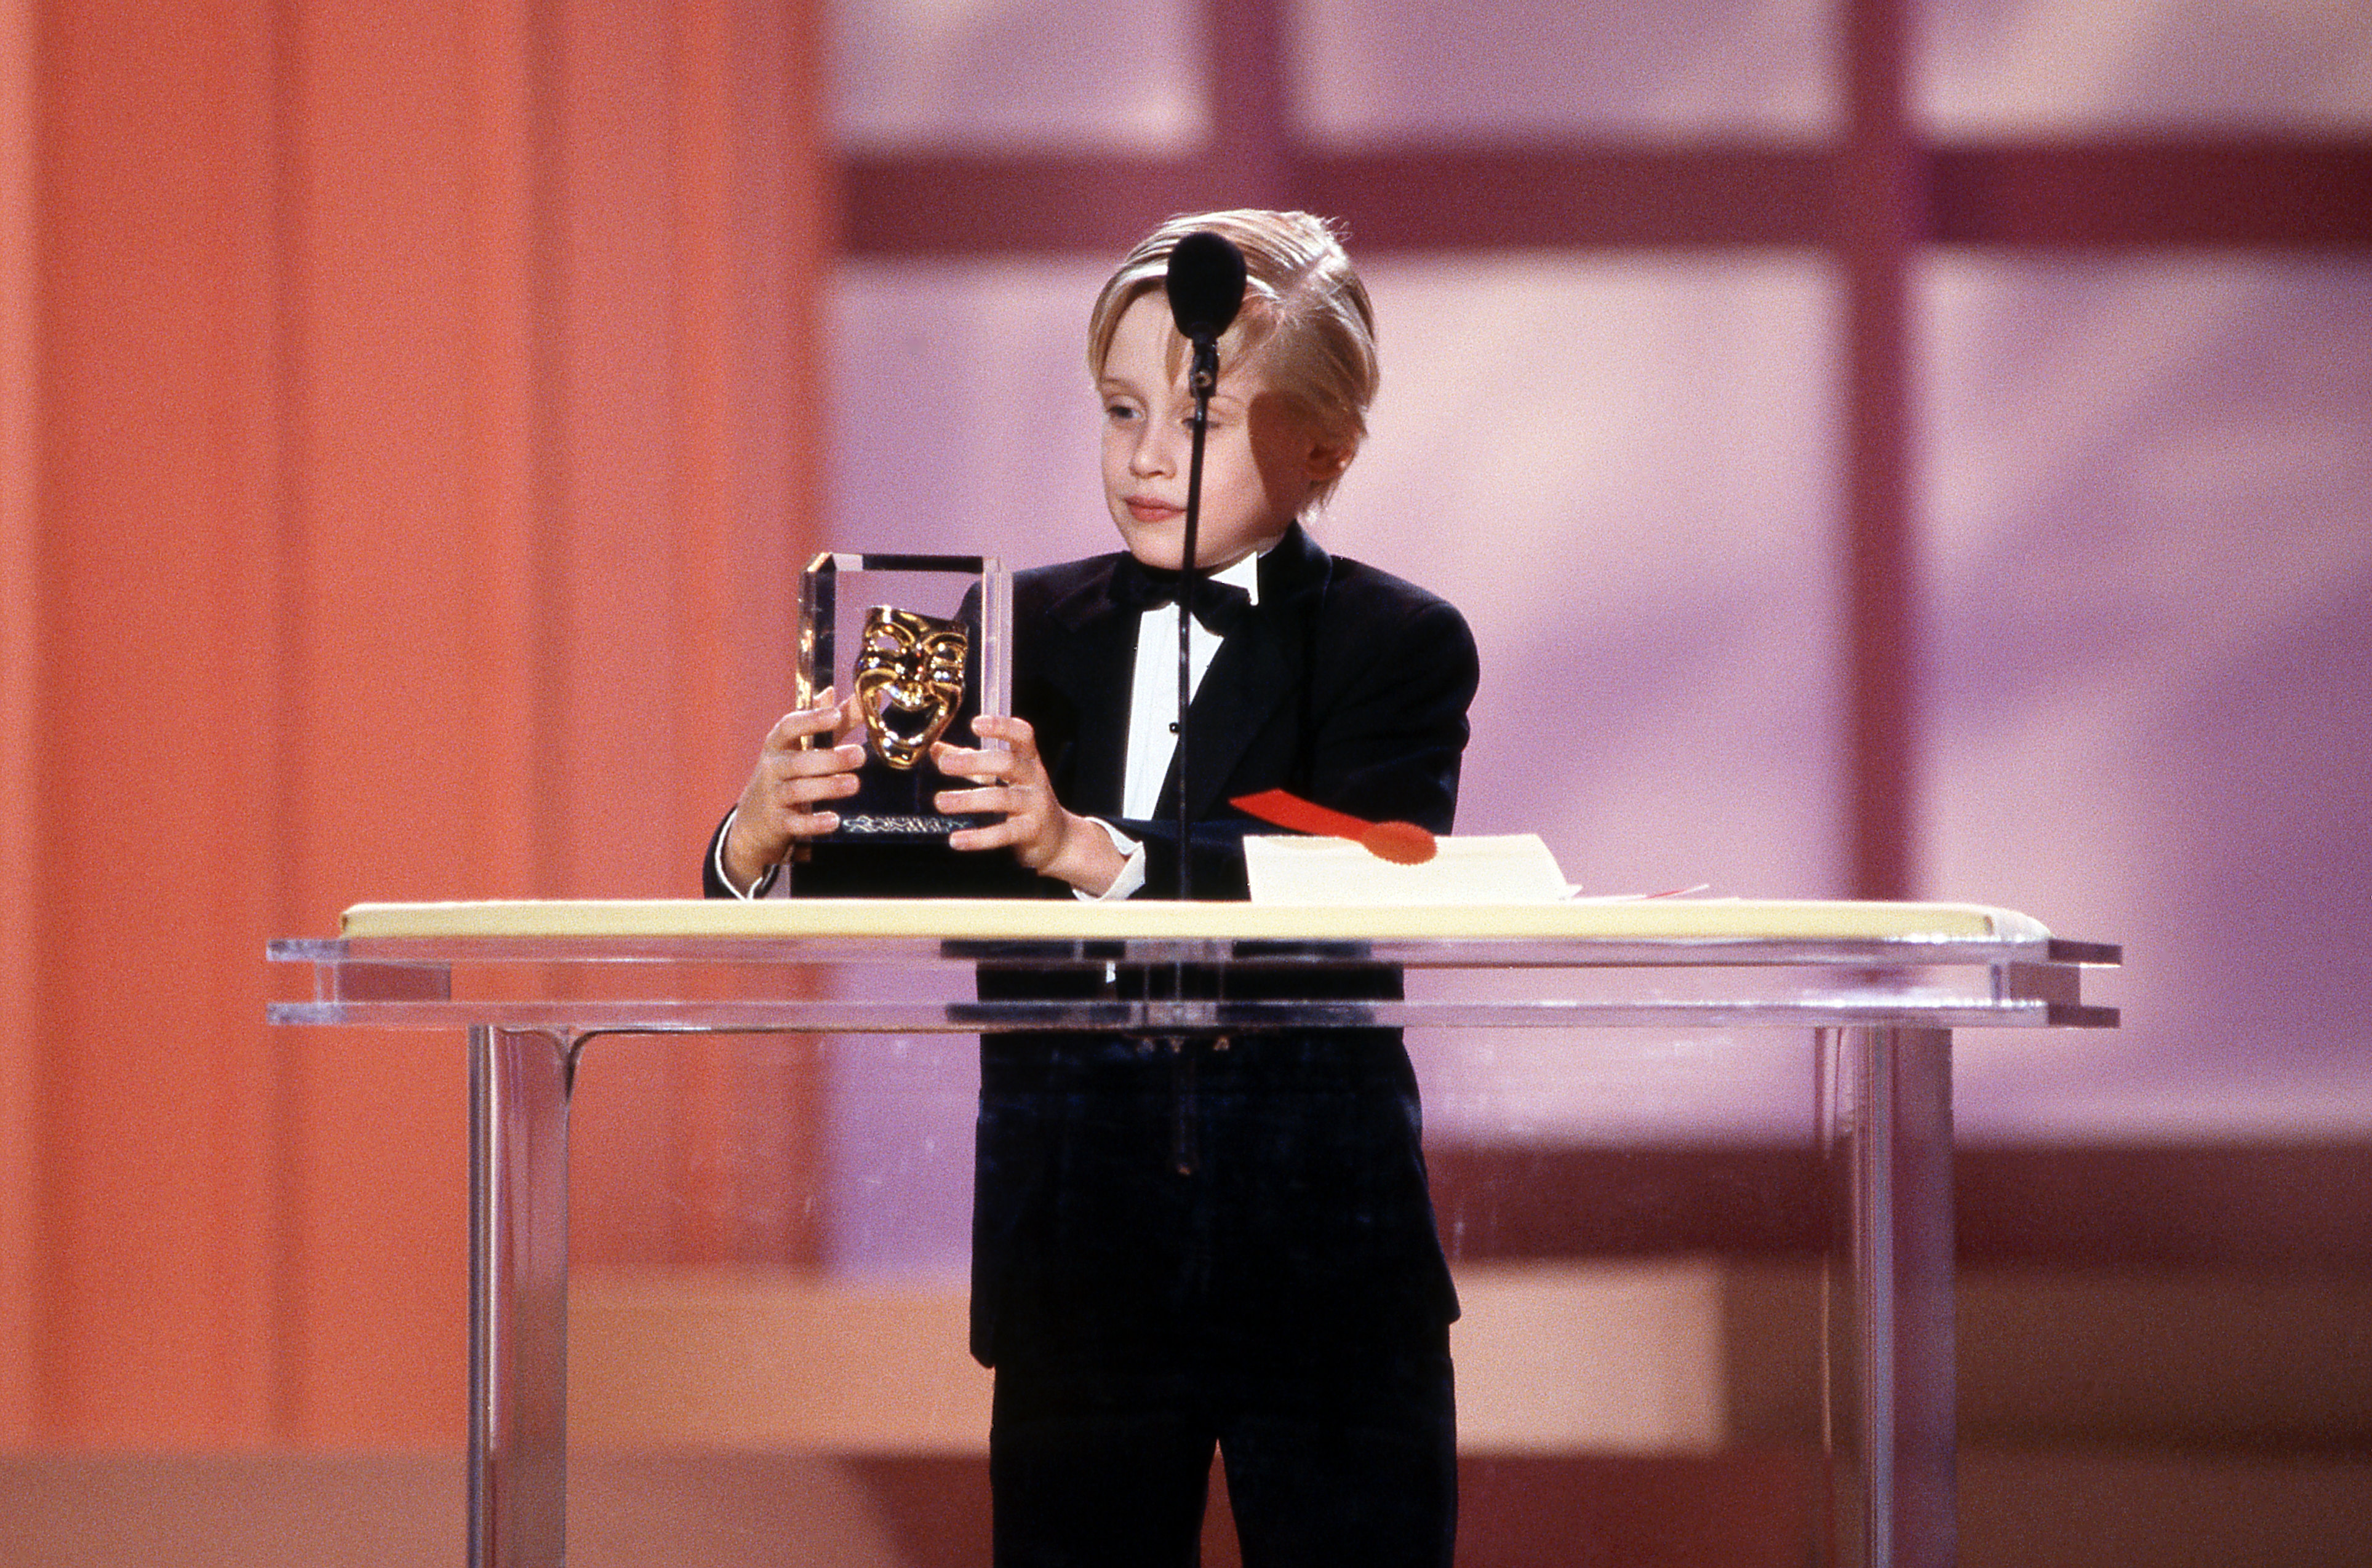 Macaulay Culkin at the 5th Annual American Comedy Awards, April 3, 1991 | Source: Getty Images